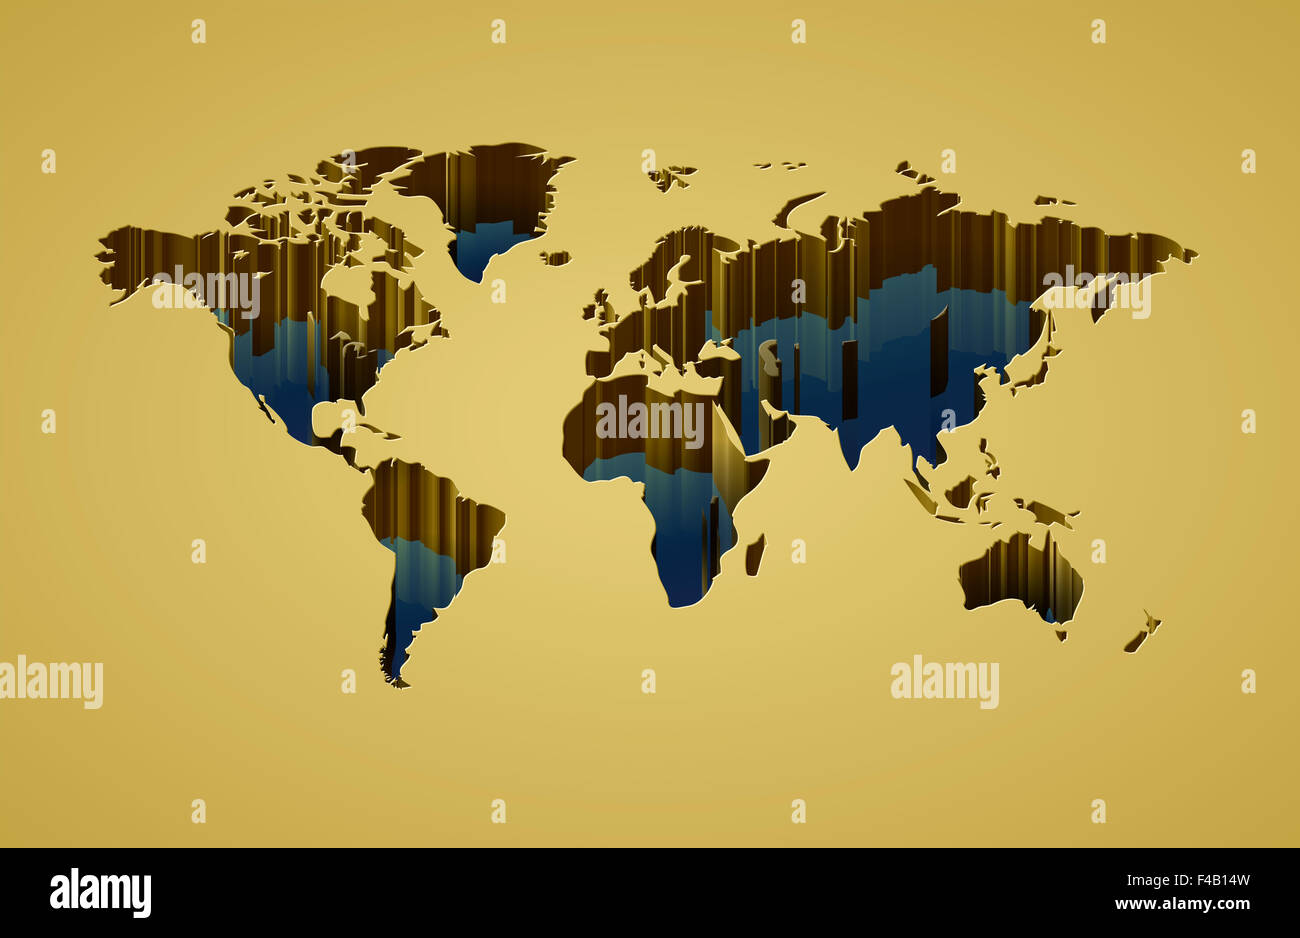 World map with 3d-effect Stock Photo